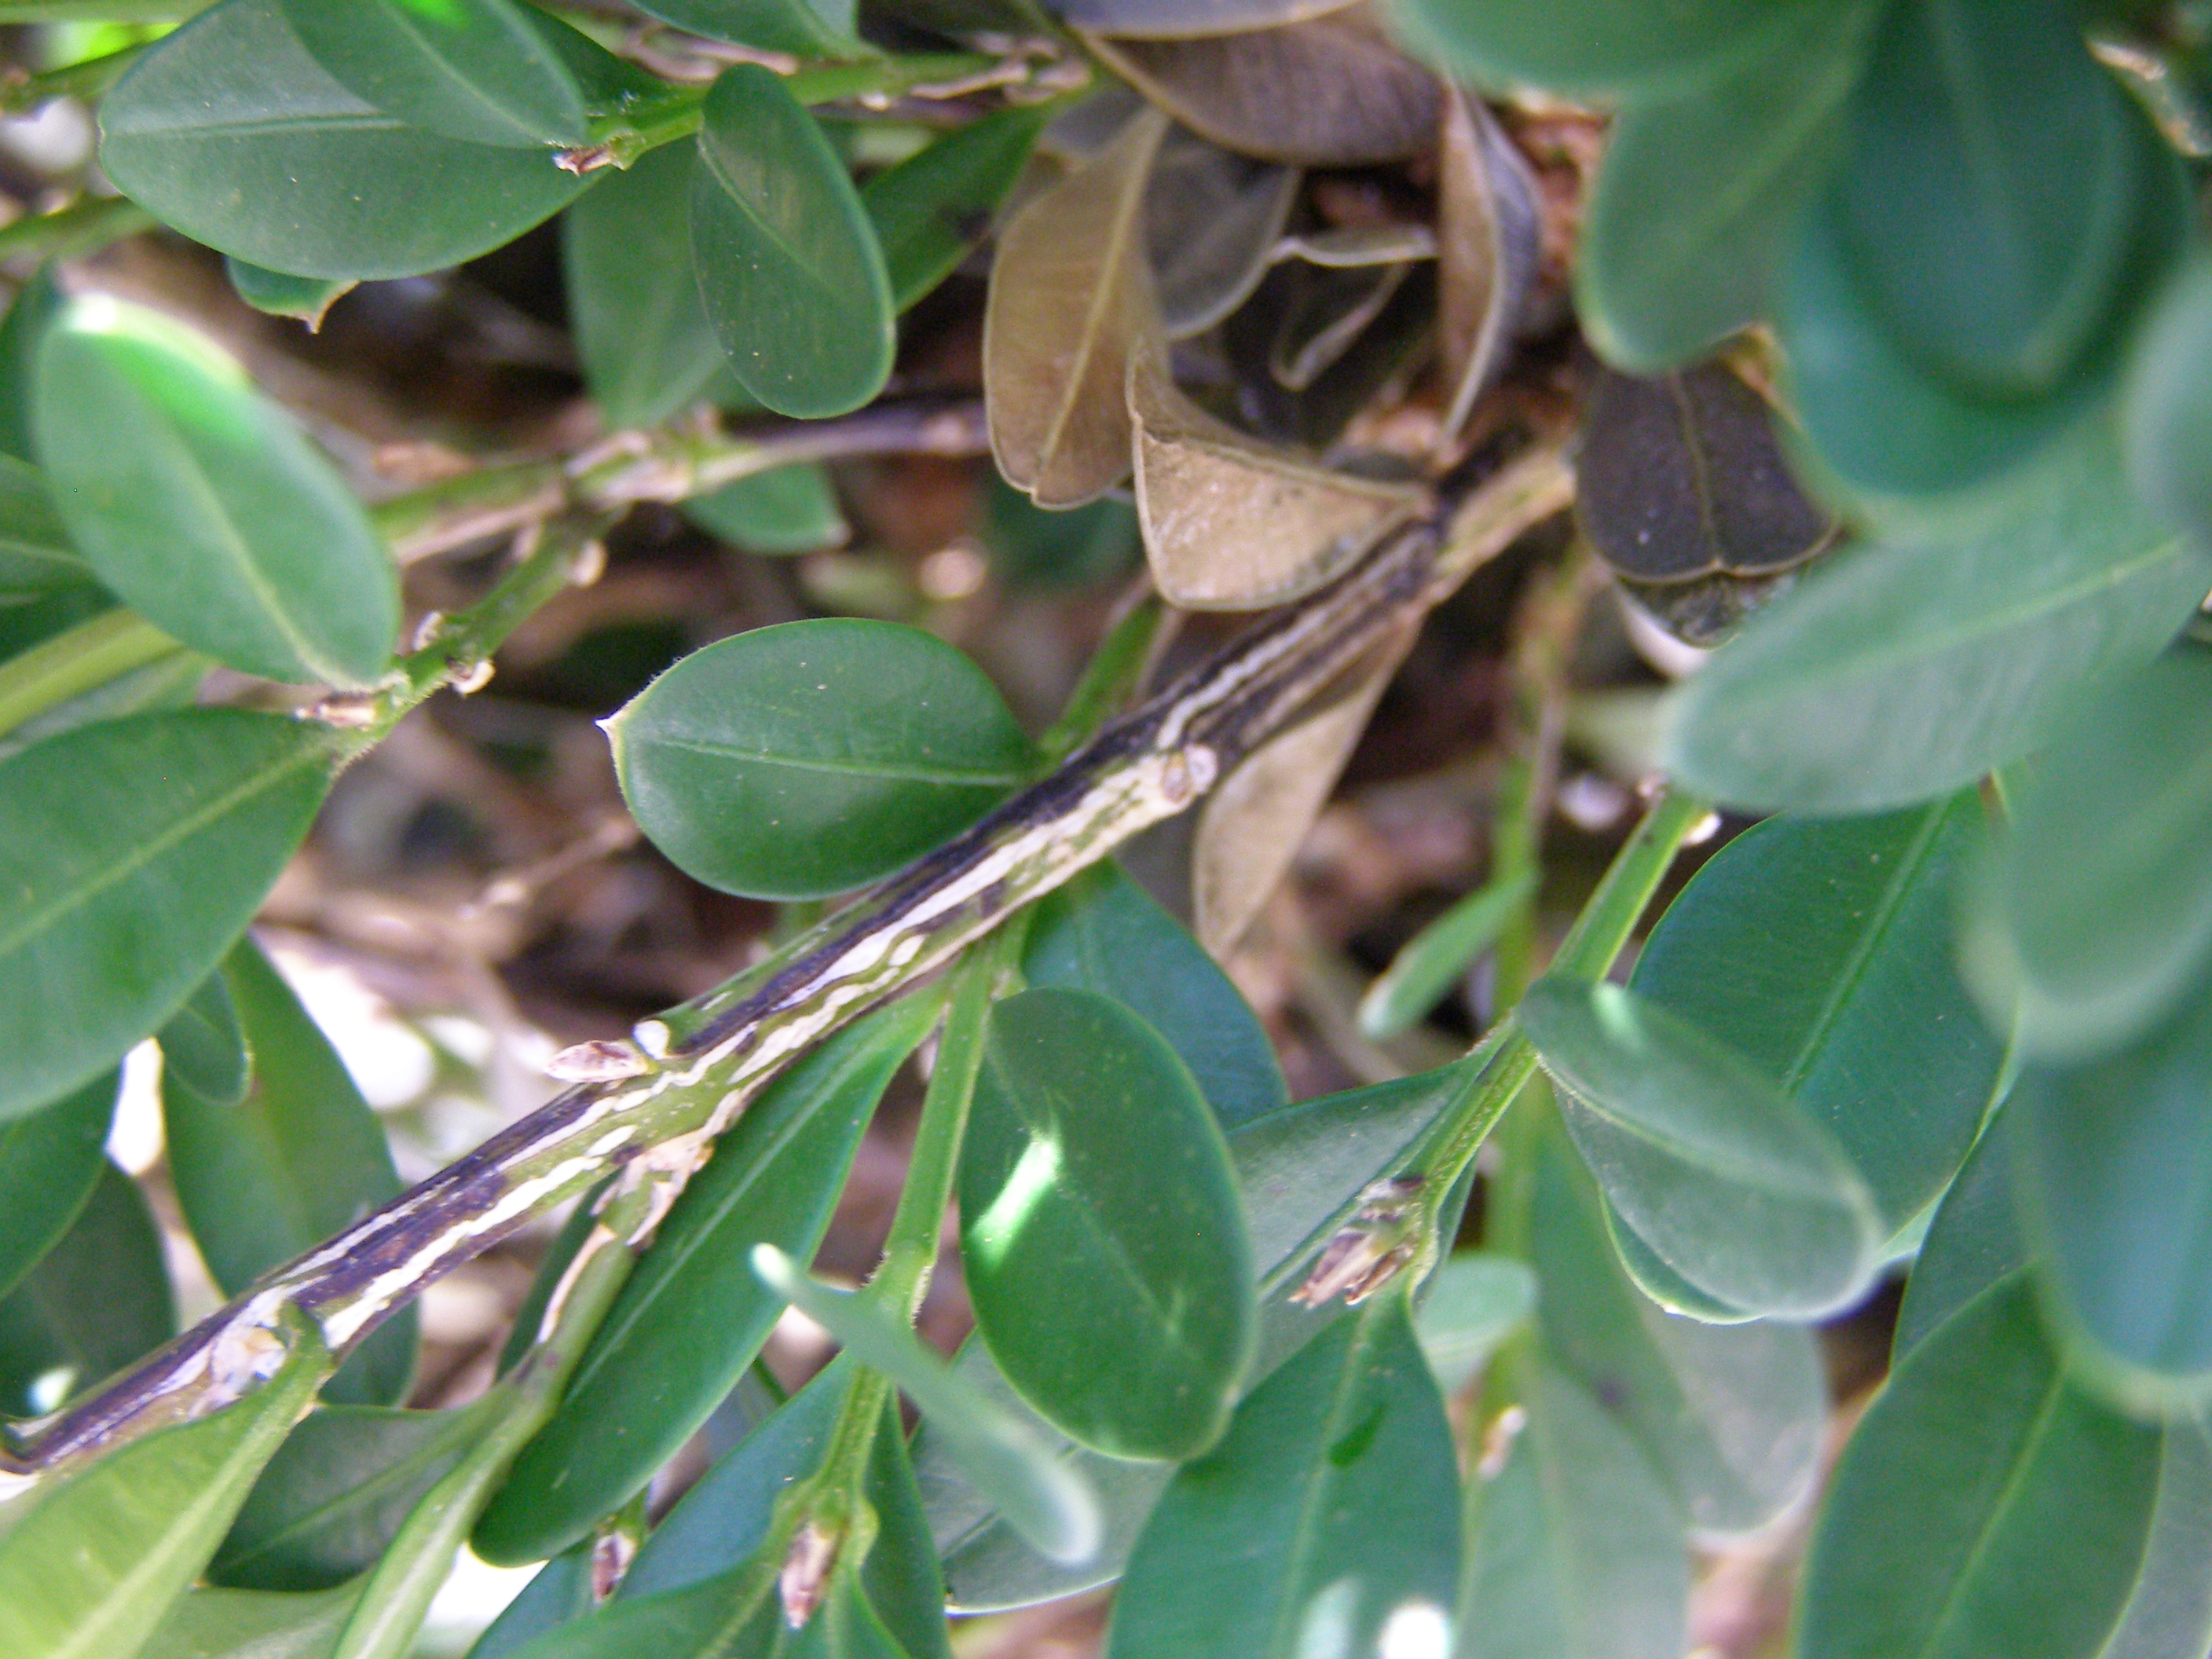 Long thin black streaks on stem of infected boxwood plant